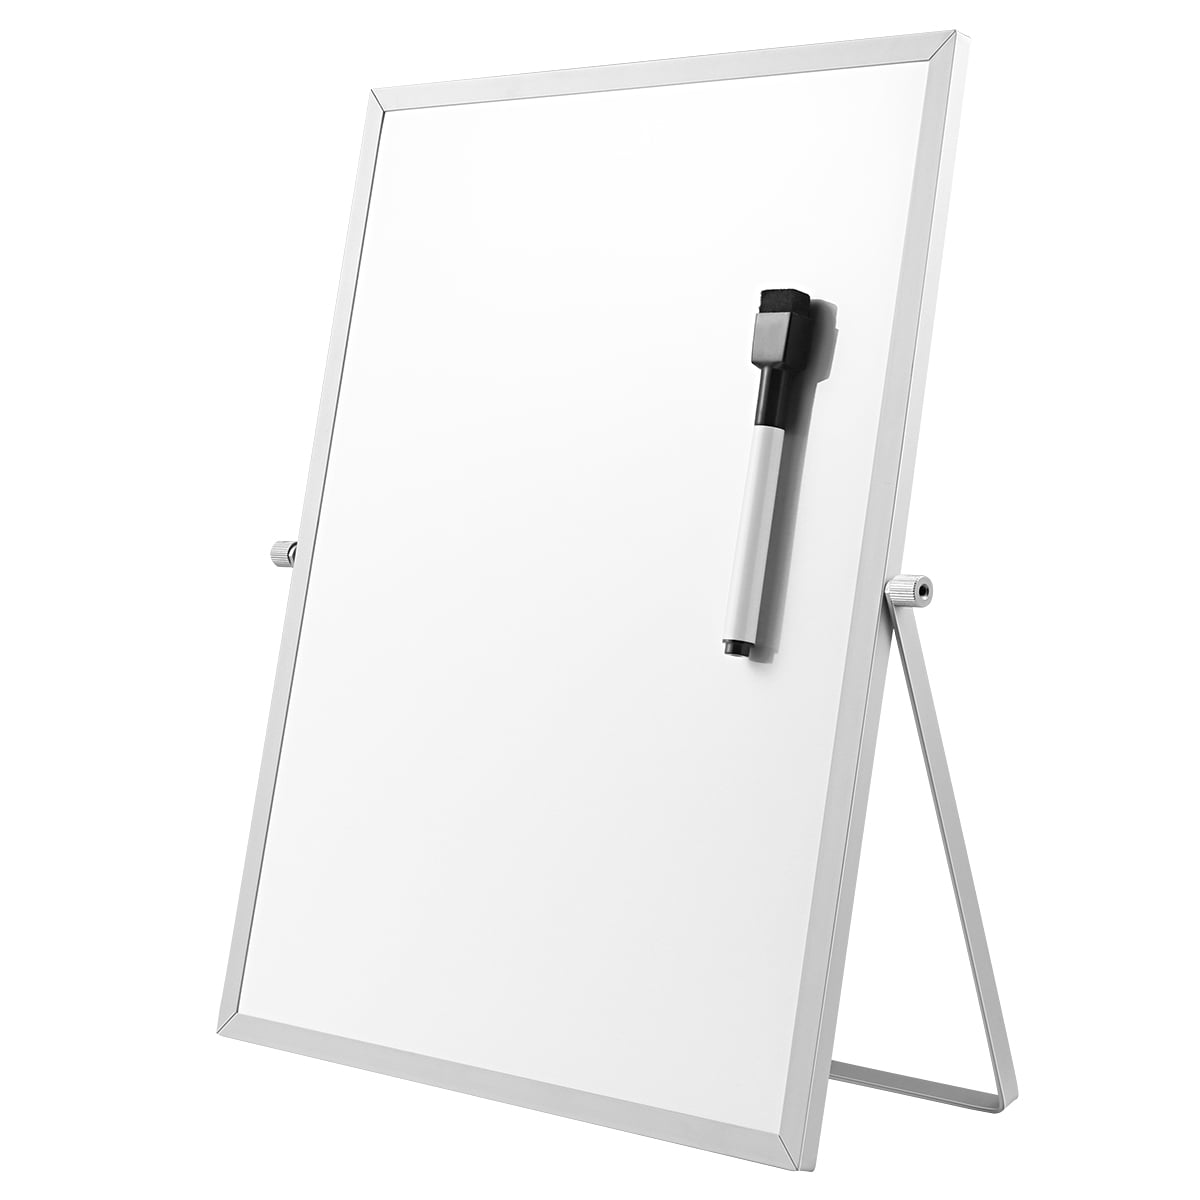 Loyalheartdy 35x24In Portable Whiteboard,Double Sided Magnetic Dry Erase  Board Free Standing Adjustable Flip Chart Easel 